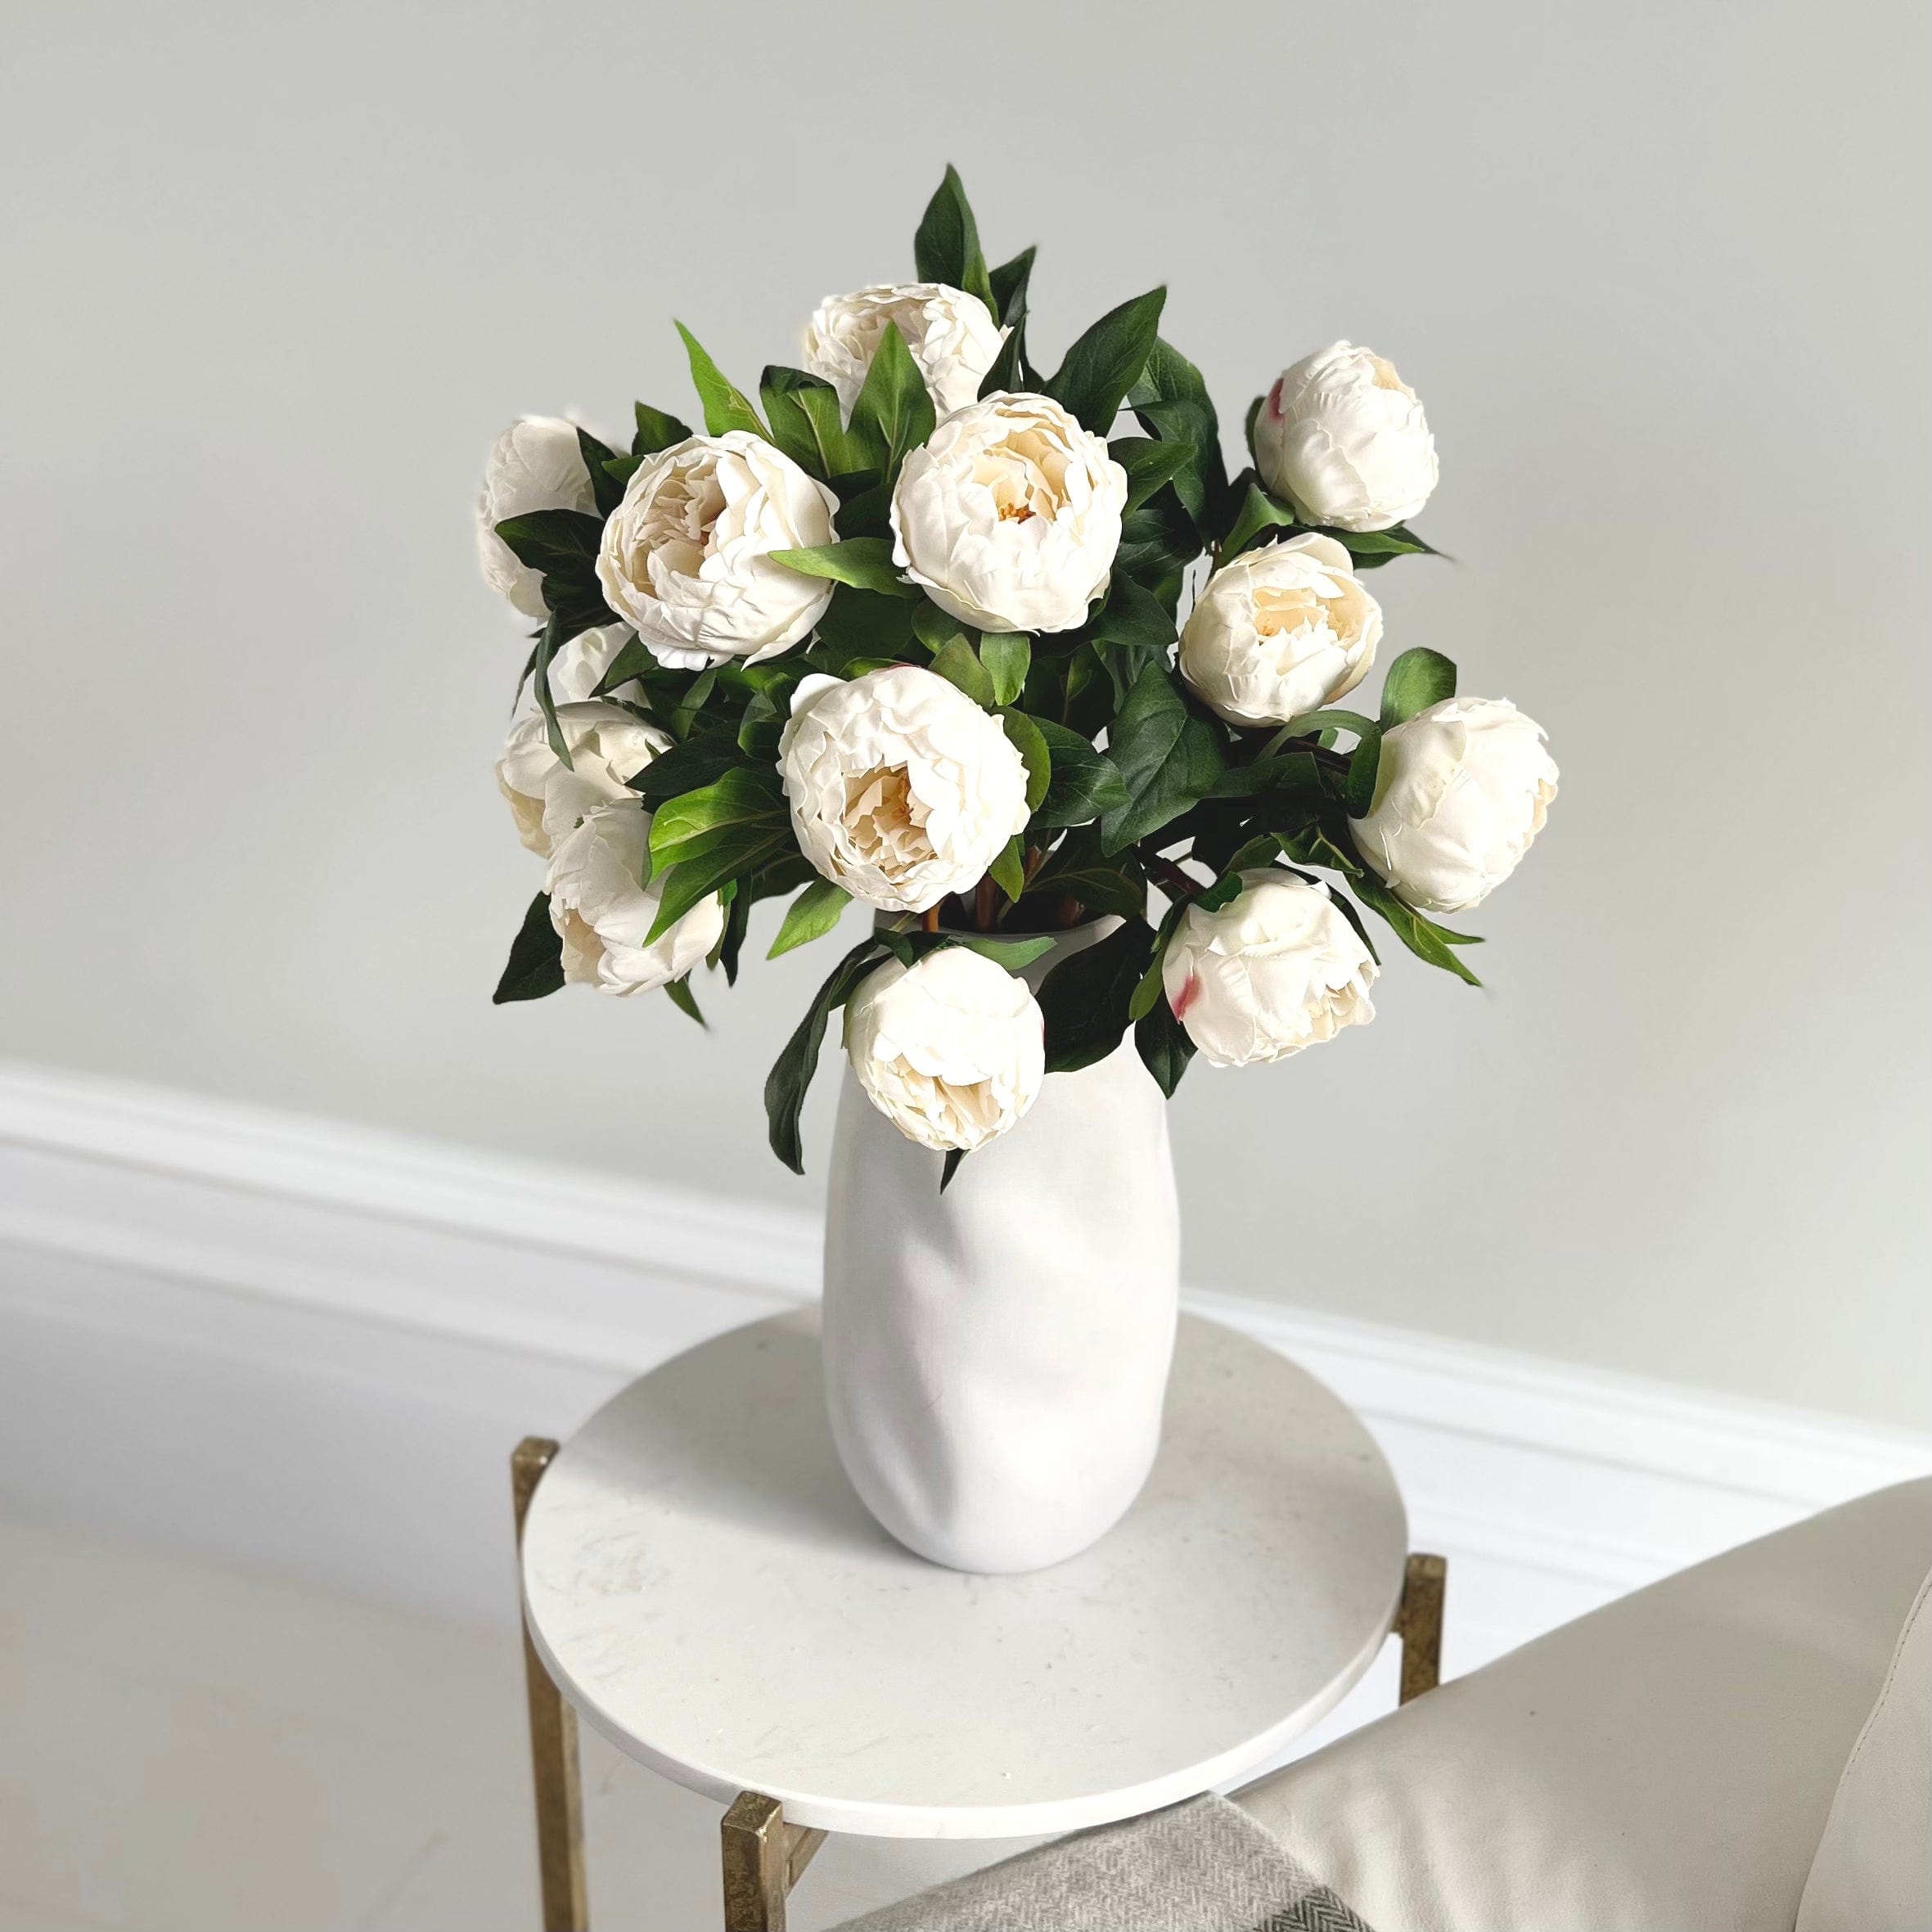 Luxury Realistic Artificial Fabric Silk White Two Bloom Real Touch Peony Buy Online from The Faux Flower Company | 7 stems of White Real Touch Peony ABZ9148WH styled in Naunton Vase ABP525B